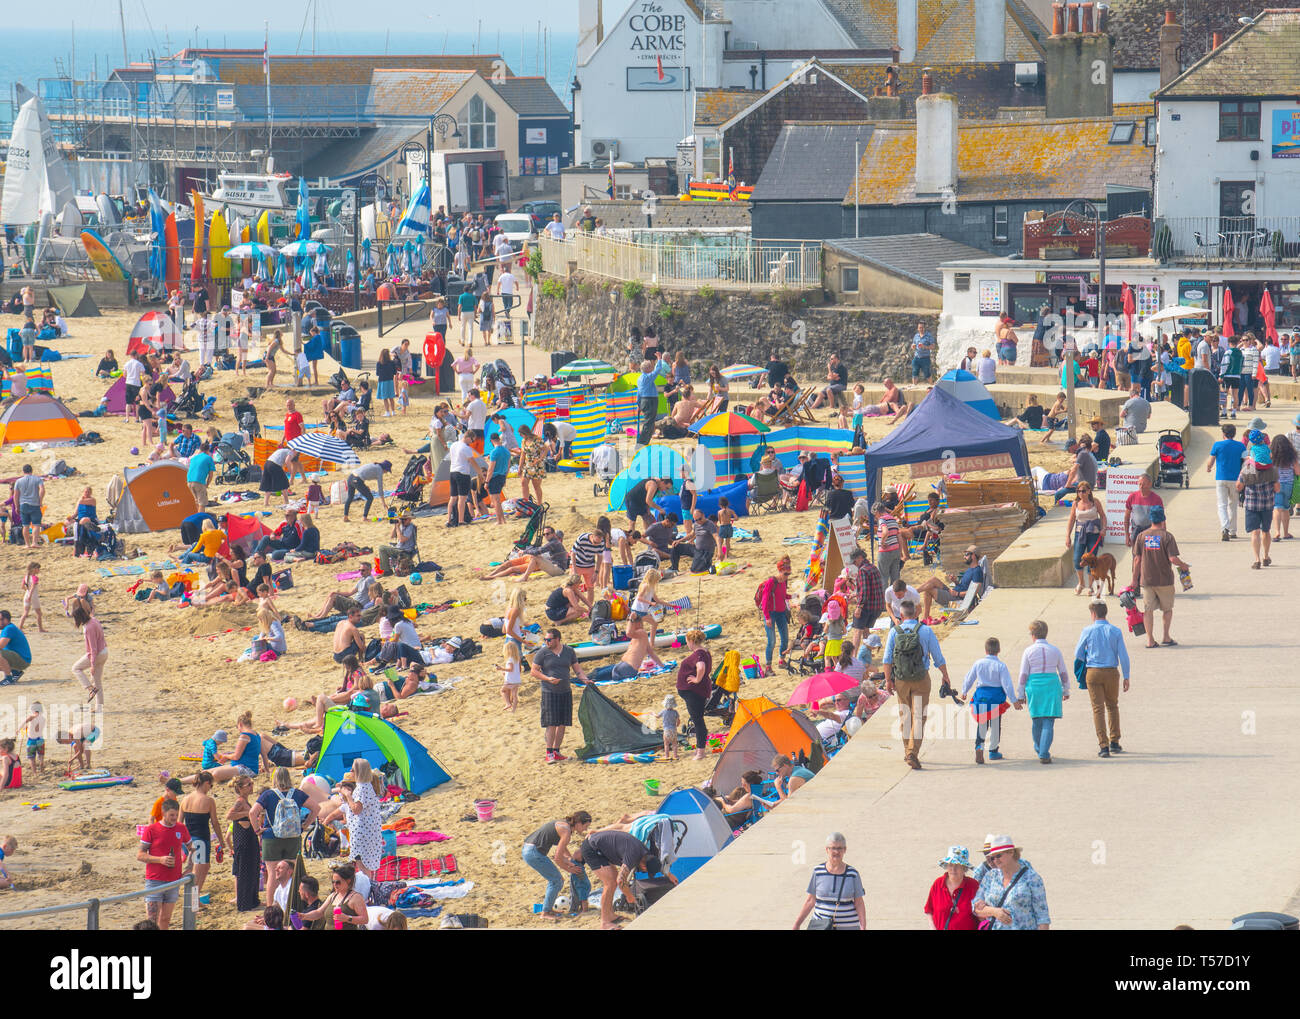 Lyme Regis, Dorset, UK. 22nd April 2019. UK Weather: Holiday makers and beach goers secure a spot early on the pretty beach at the seaside resort of Lyme Regis to enjoy a day of hot and hazy sunshine on the Bank Holiday.  Visitors have enjoyed record breaking heat over the Easter weekend with temperatures set to soar even further today. Credit: Celia McMahon/Alamy Live News. Stock Photo